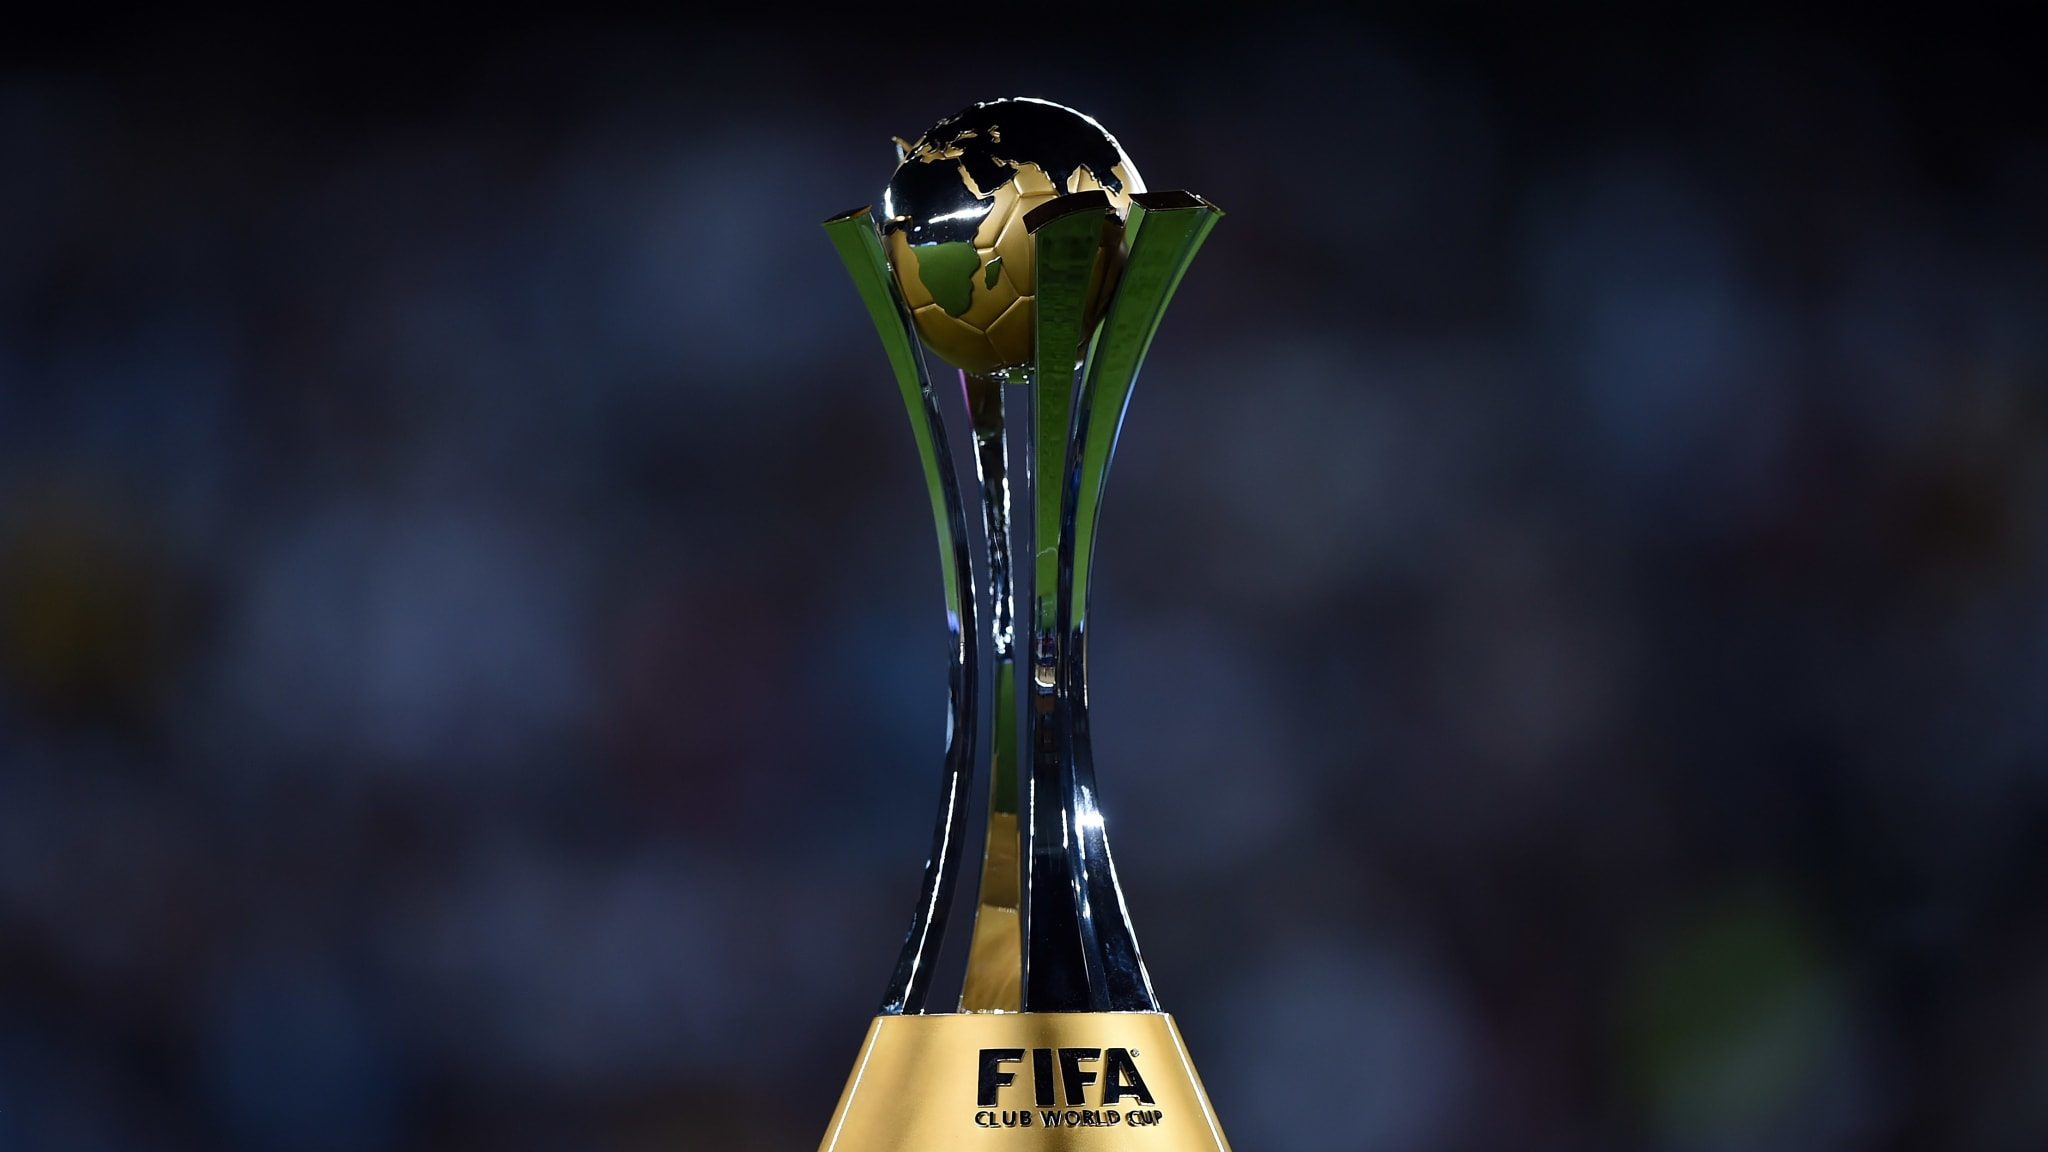 Club World Cup dates still up in the air - AS USA